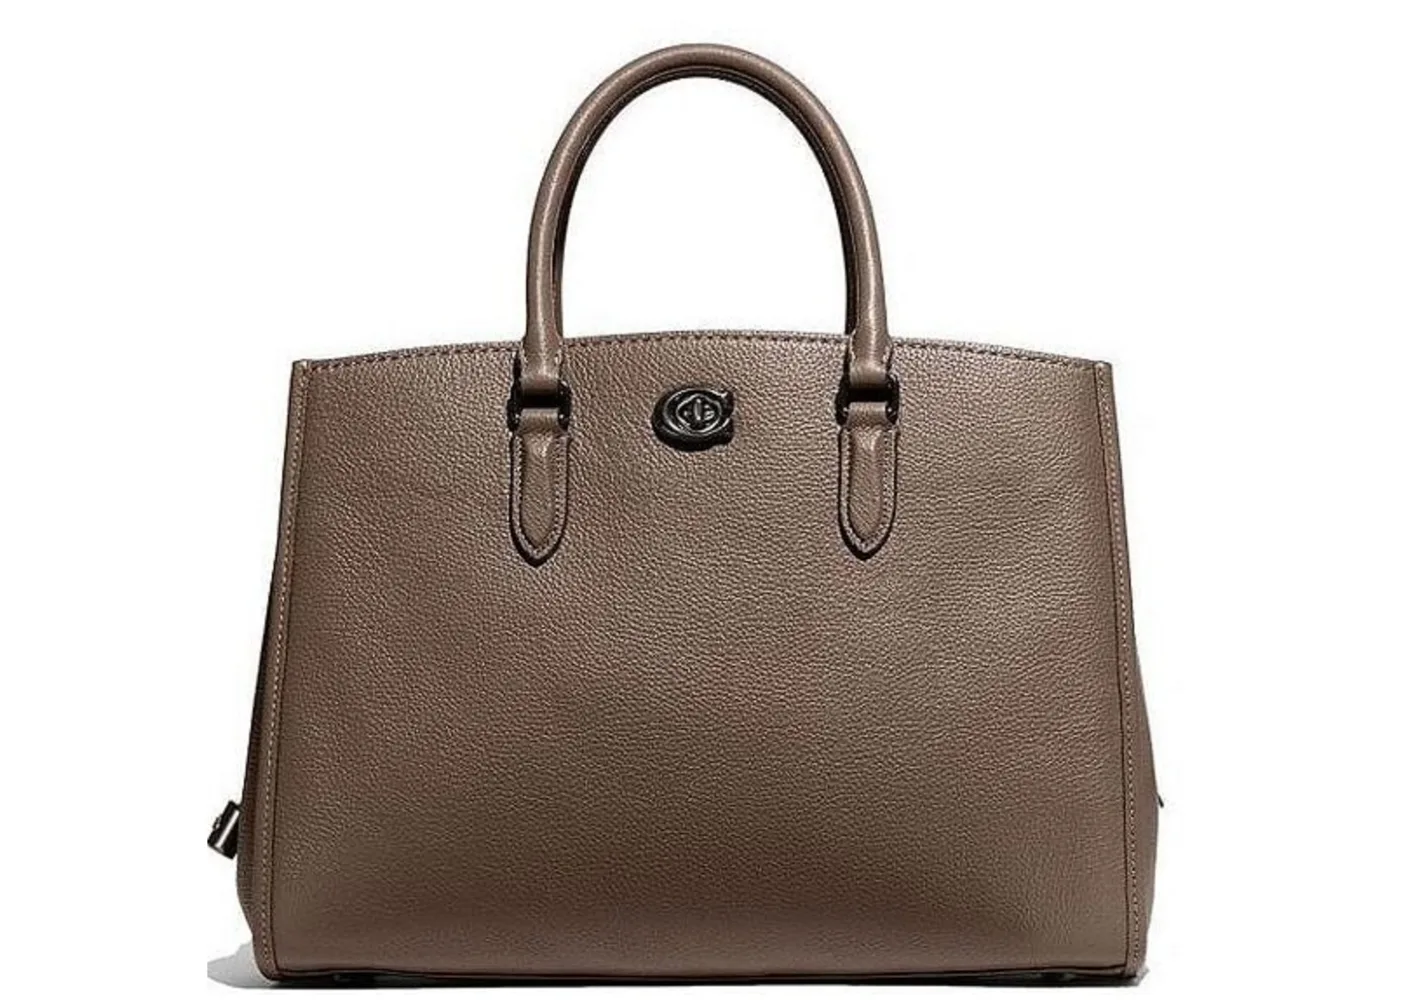 Jane Birkin Bags Dupes Without The Hermès Price Tag